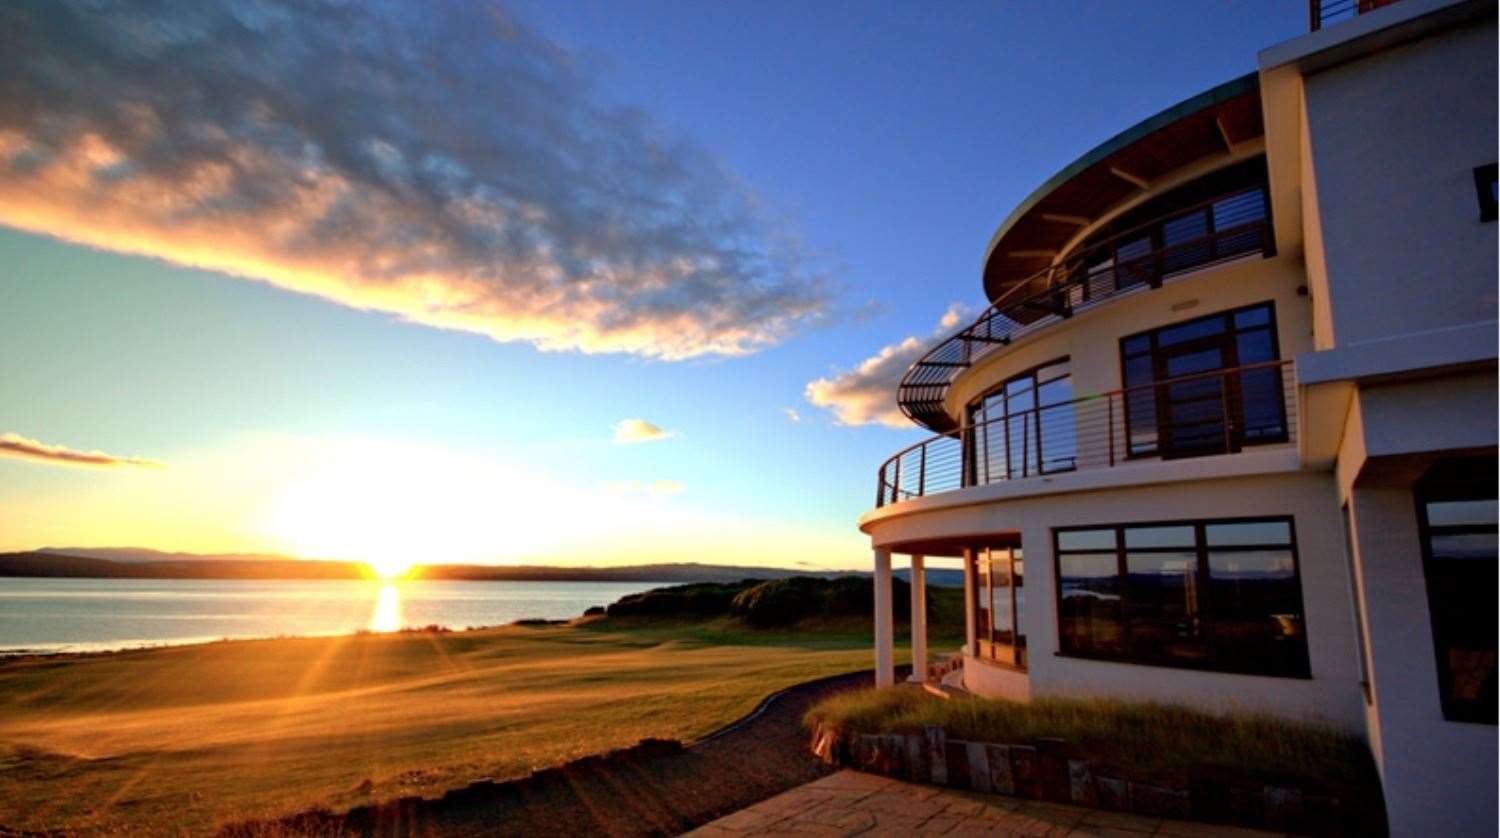 The Castle Stuart clubhouse, which boasts stunning views over the Moray Firth, will undergo a large expansion if the plans are approved.